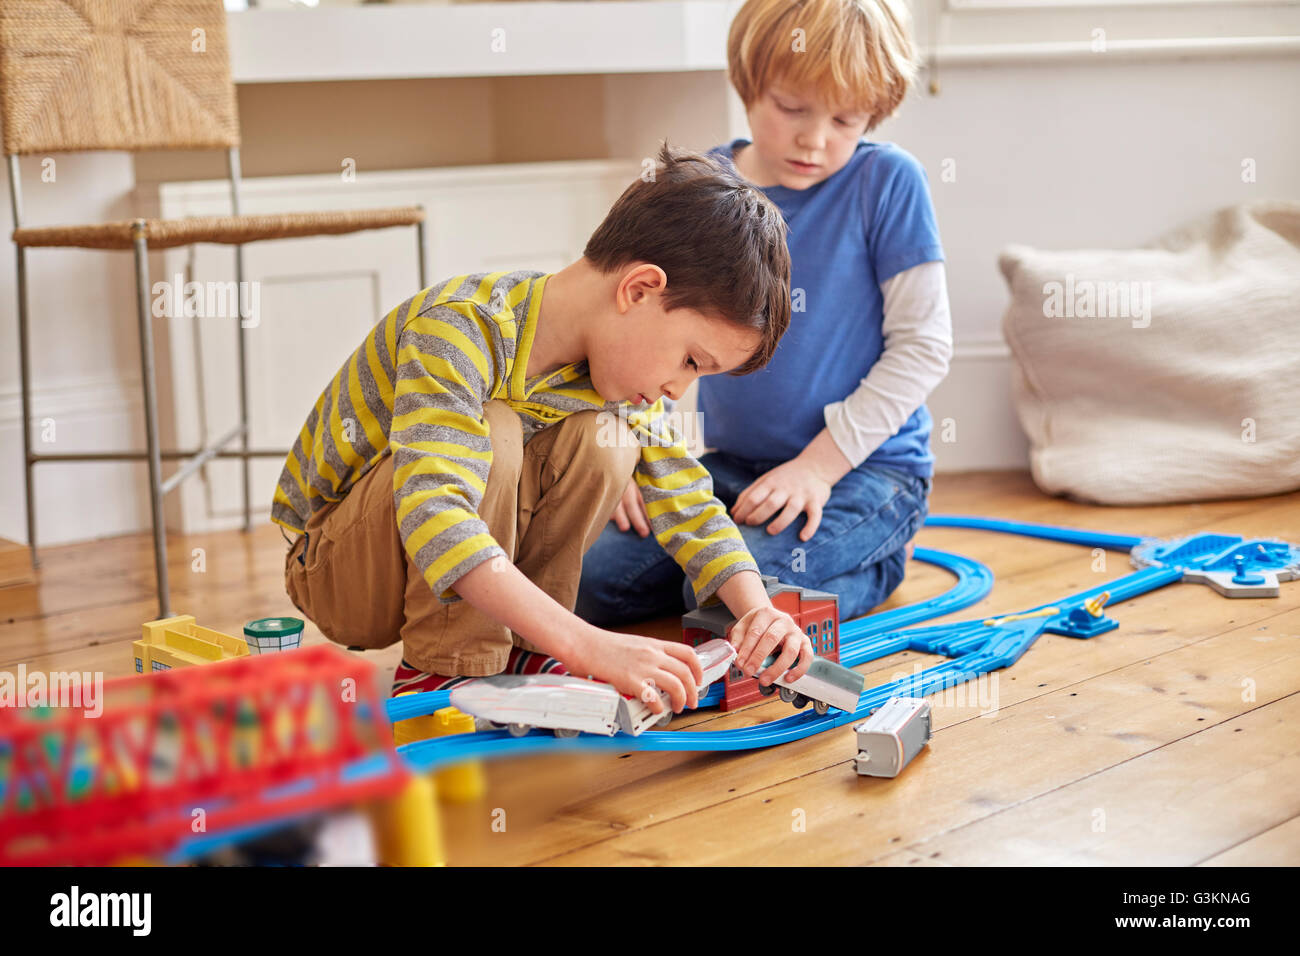 Two young boys playing with toy train set Stock Photo